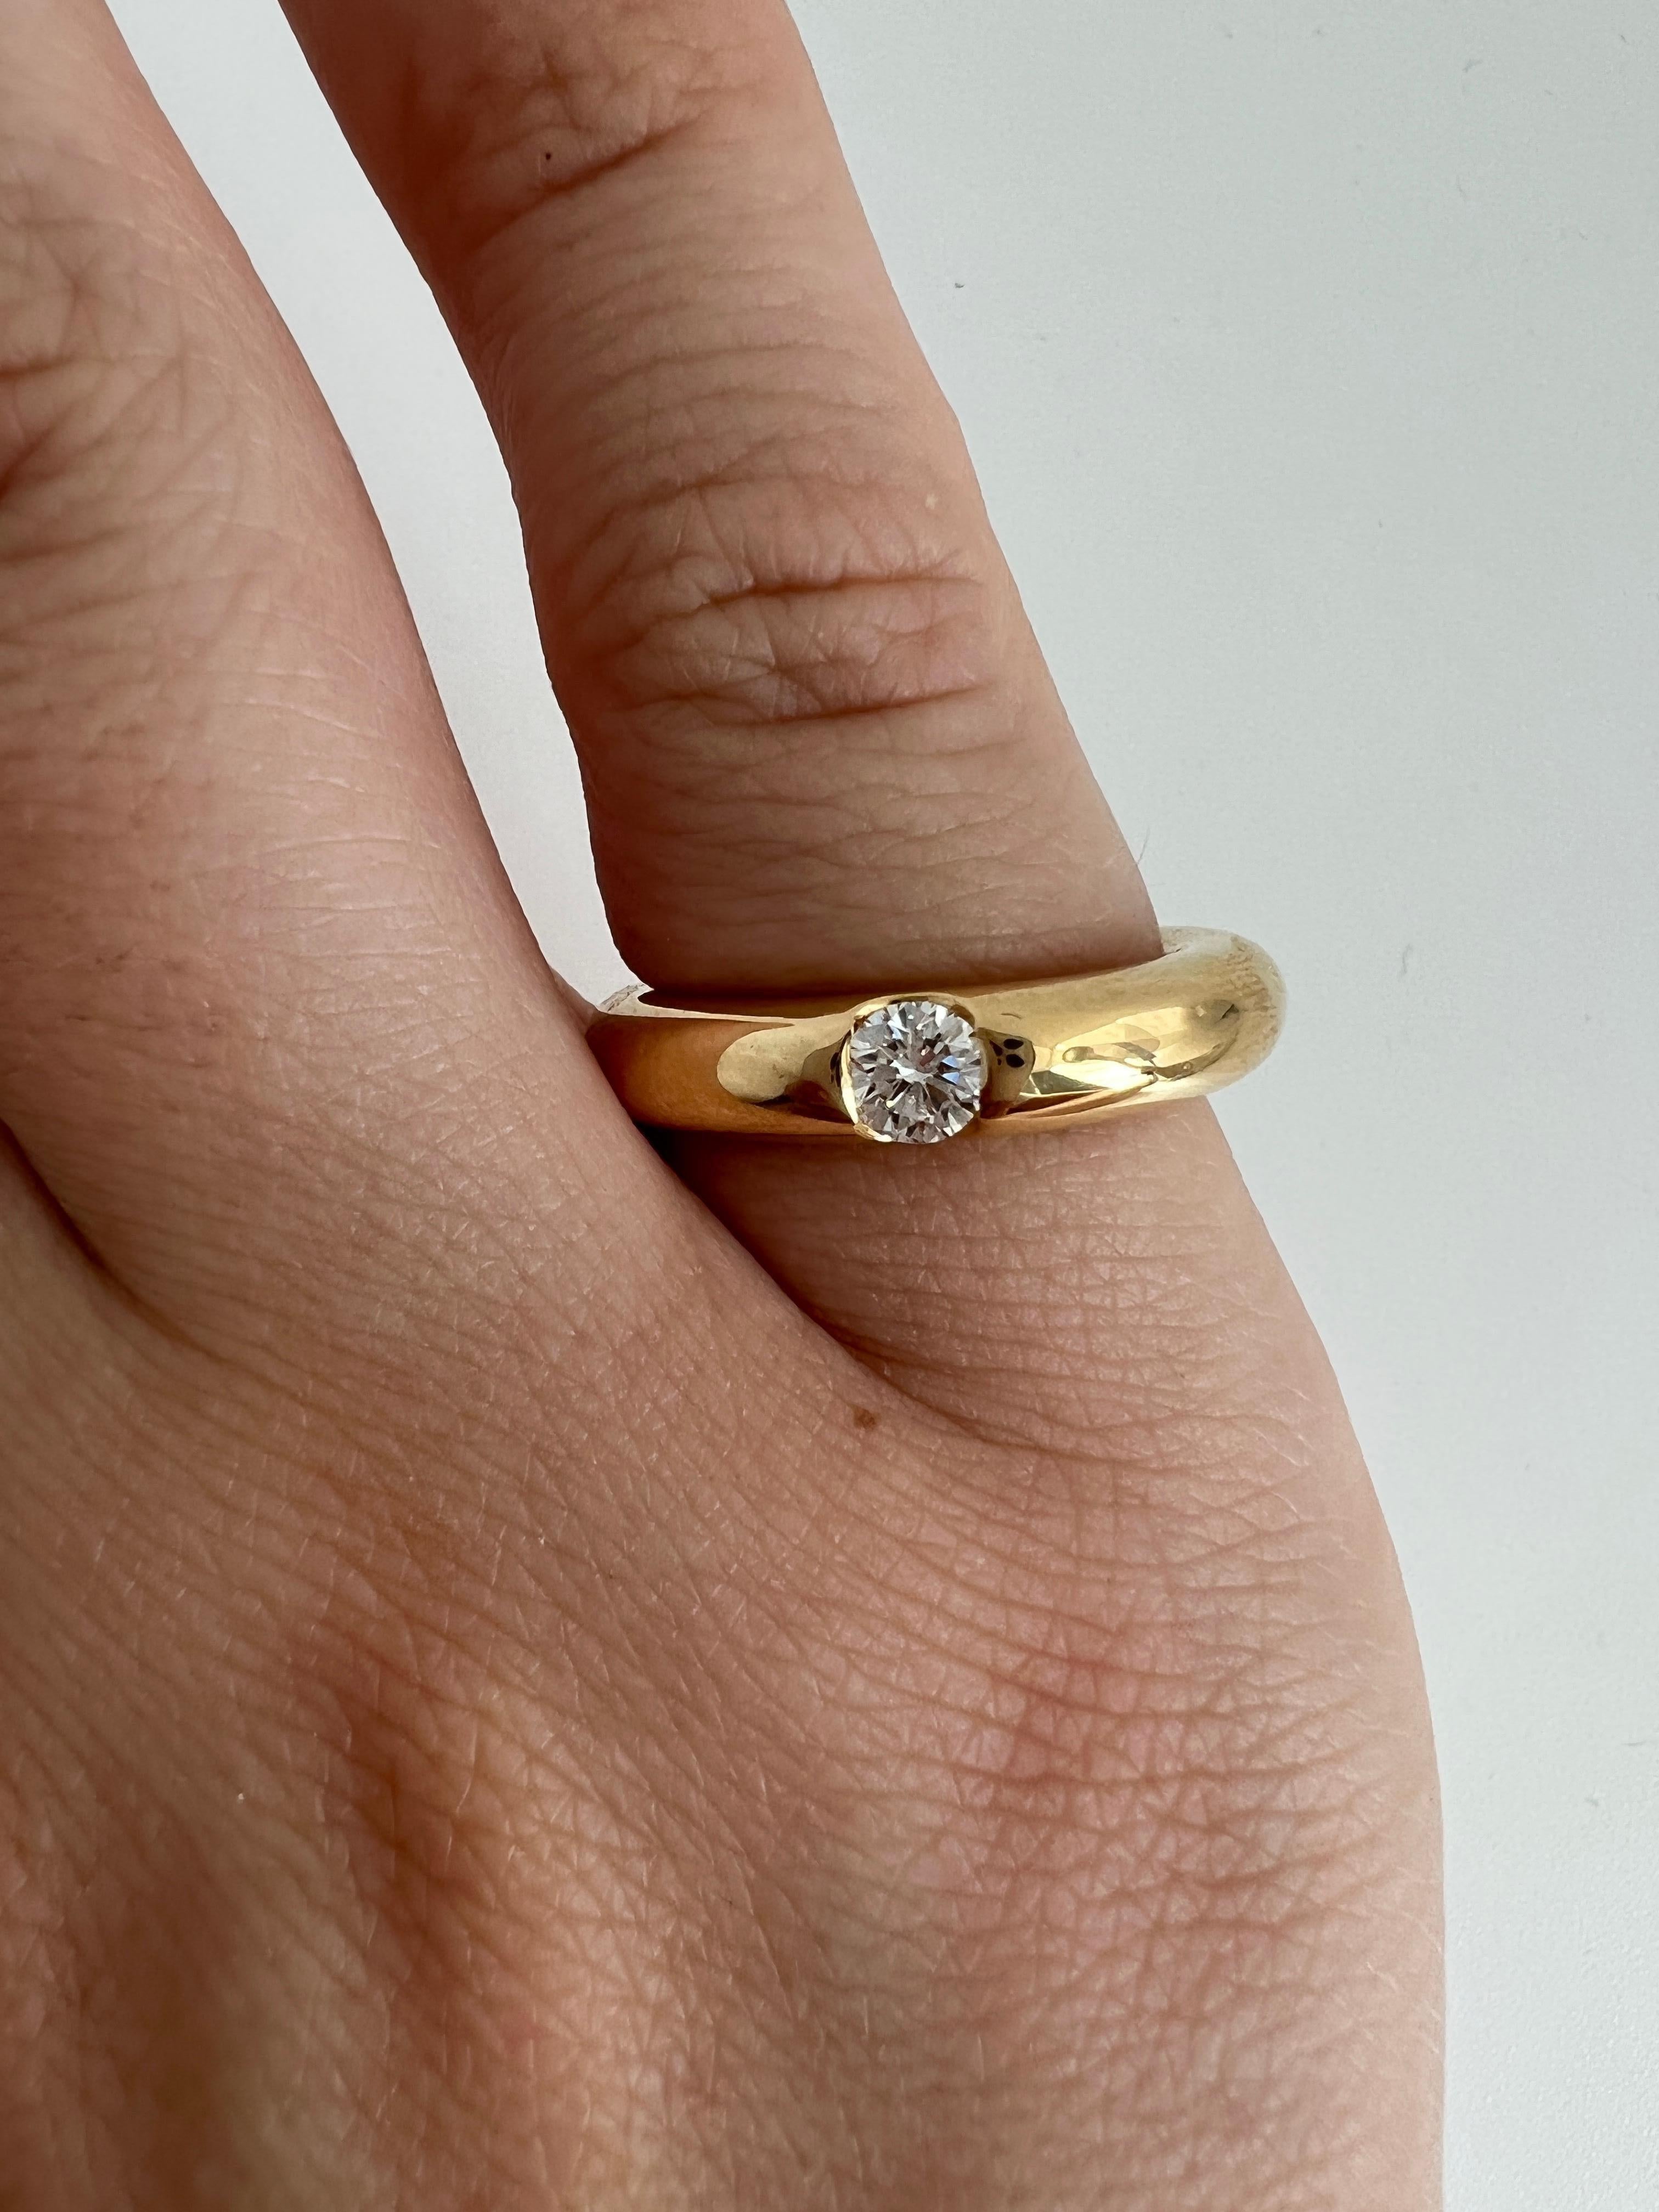 Vintage Cartier Round Diamond Ellipse 18k Yellow Gold Solitaire Band Ring US5 49 For Sale 7